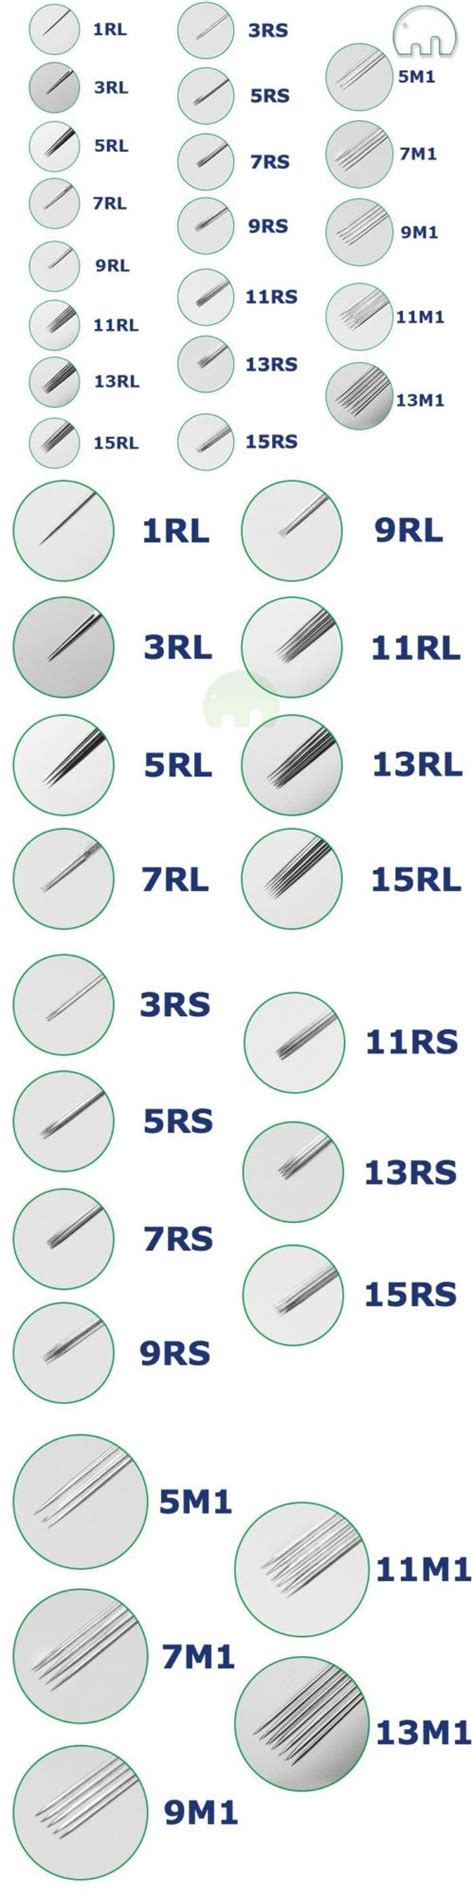 Tattoo Needle Sizes And Uses Chart